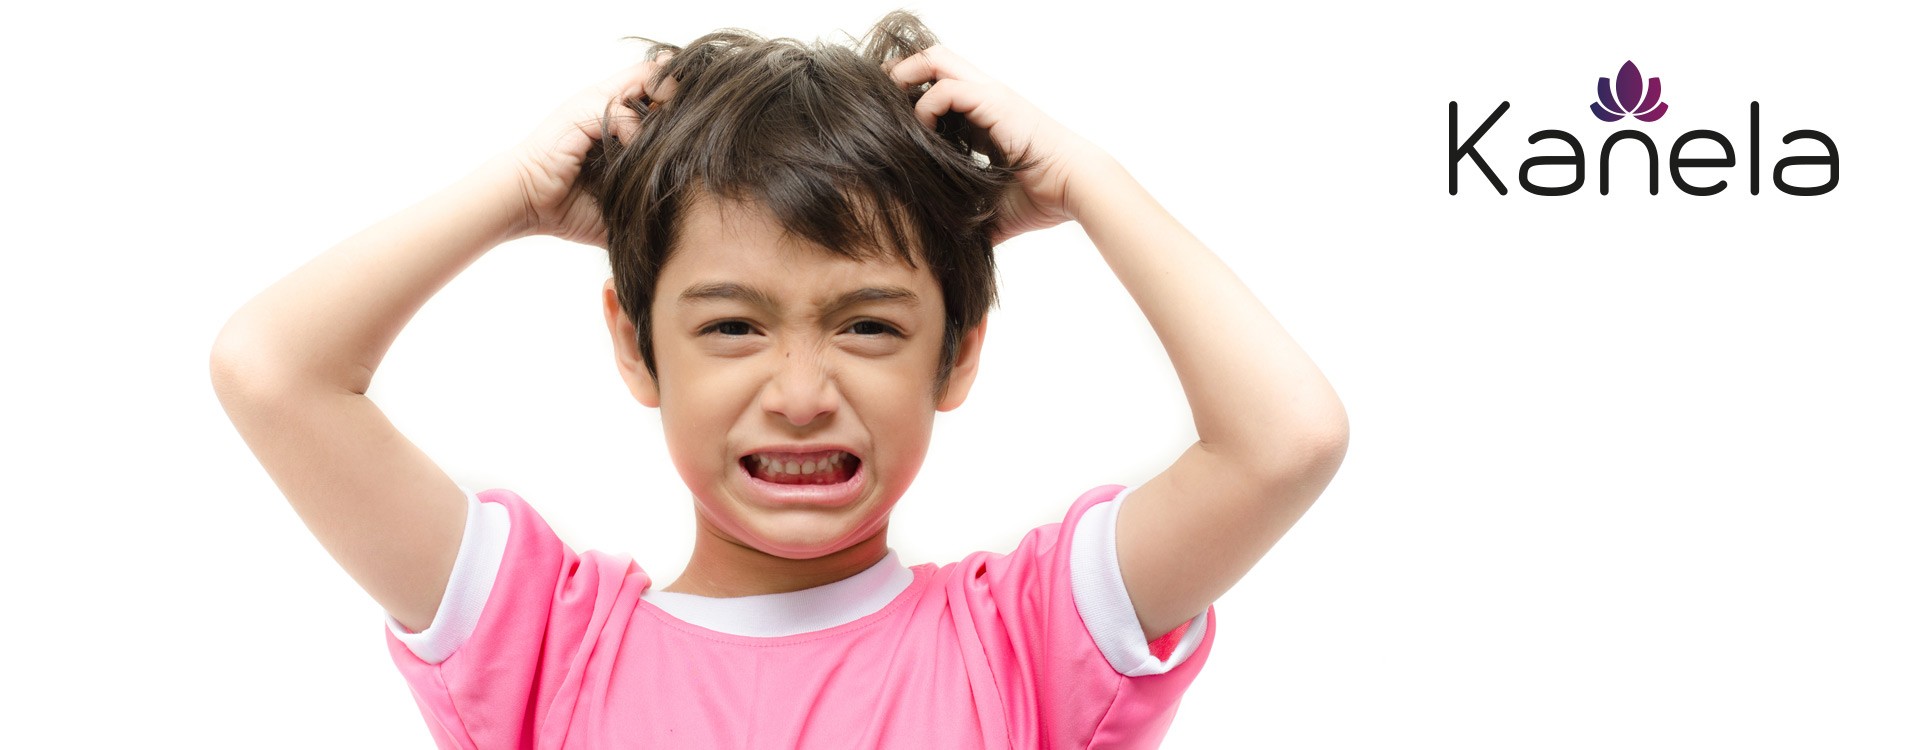 What helps against head lice?